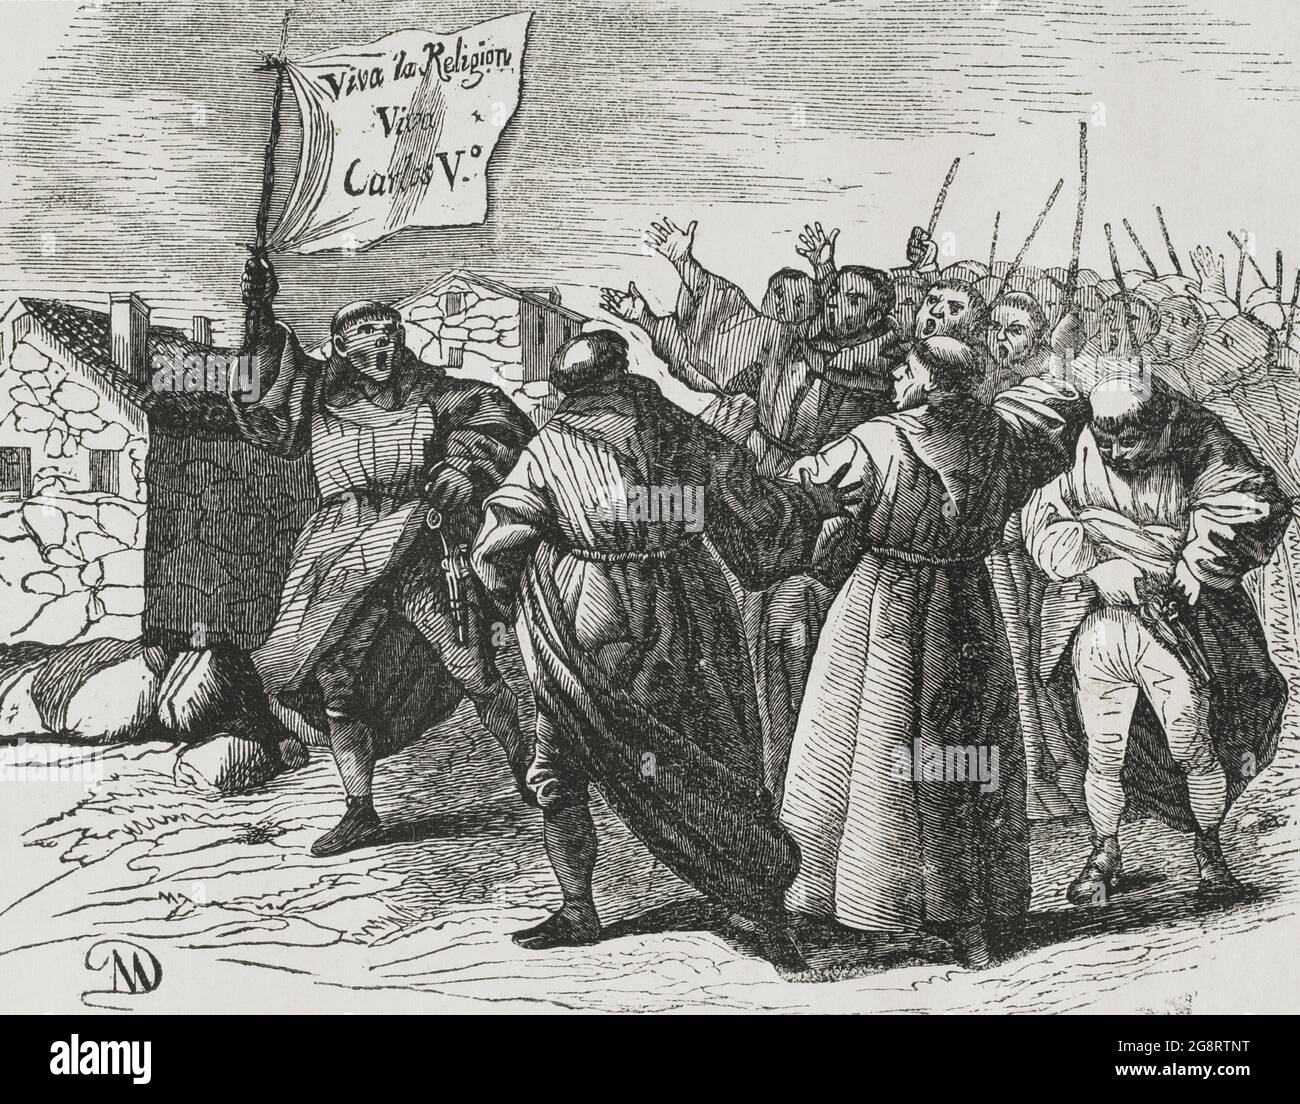 Spain. First Carlist War (1833-1840). Monastic uprising. Franciscan friars storm the streets of Salamanca, shouting in support of King Charles V (Don Carlos María Isidro de Borbón, the Carlist pretender to the Spanish throne), to provocate the supporters of Isabella II. Engraving. Panorama Español, Crónica Contemporánea. Madrid, 1842. Stock Photo